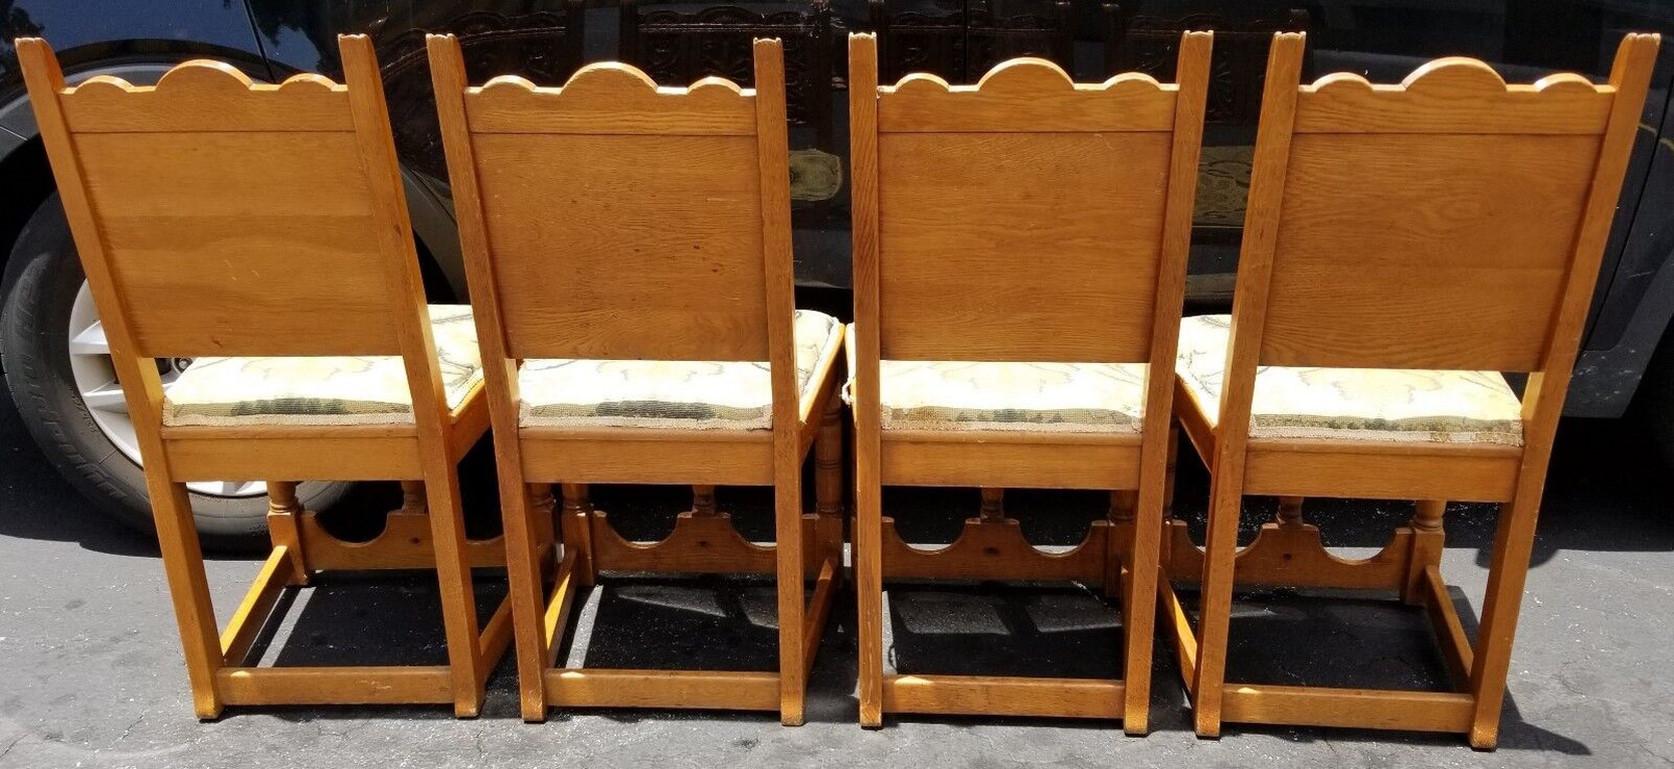 20th Century Spanish Revival Mission Oak Jacobean Dining Chairs For Sale